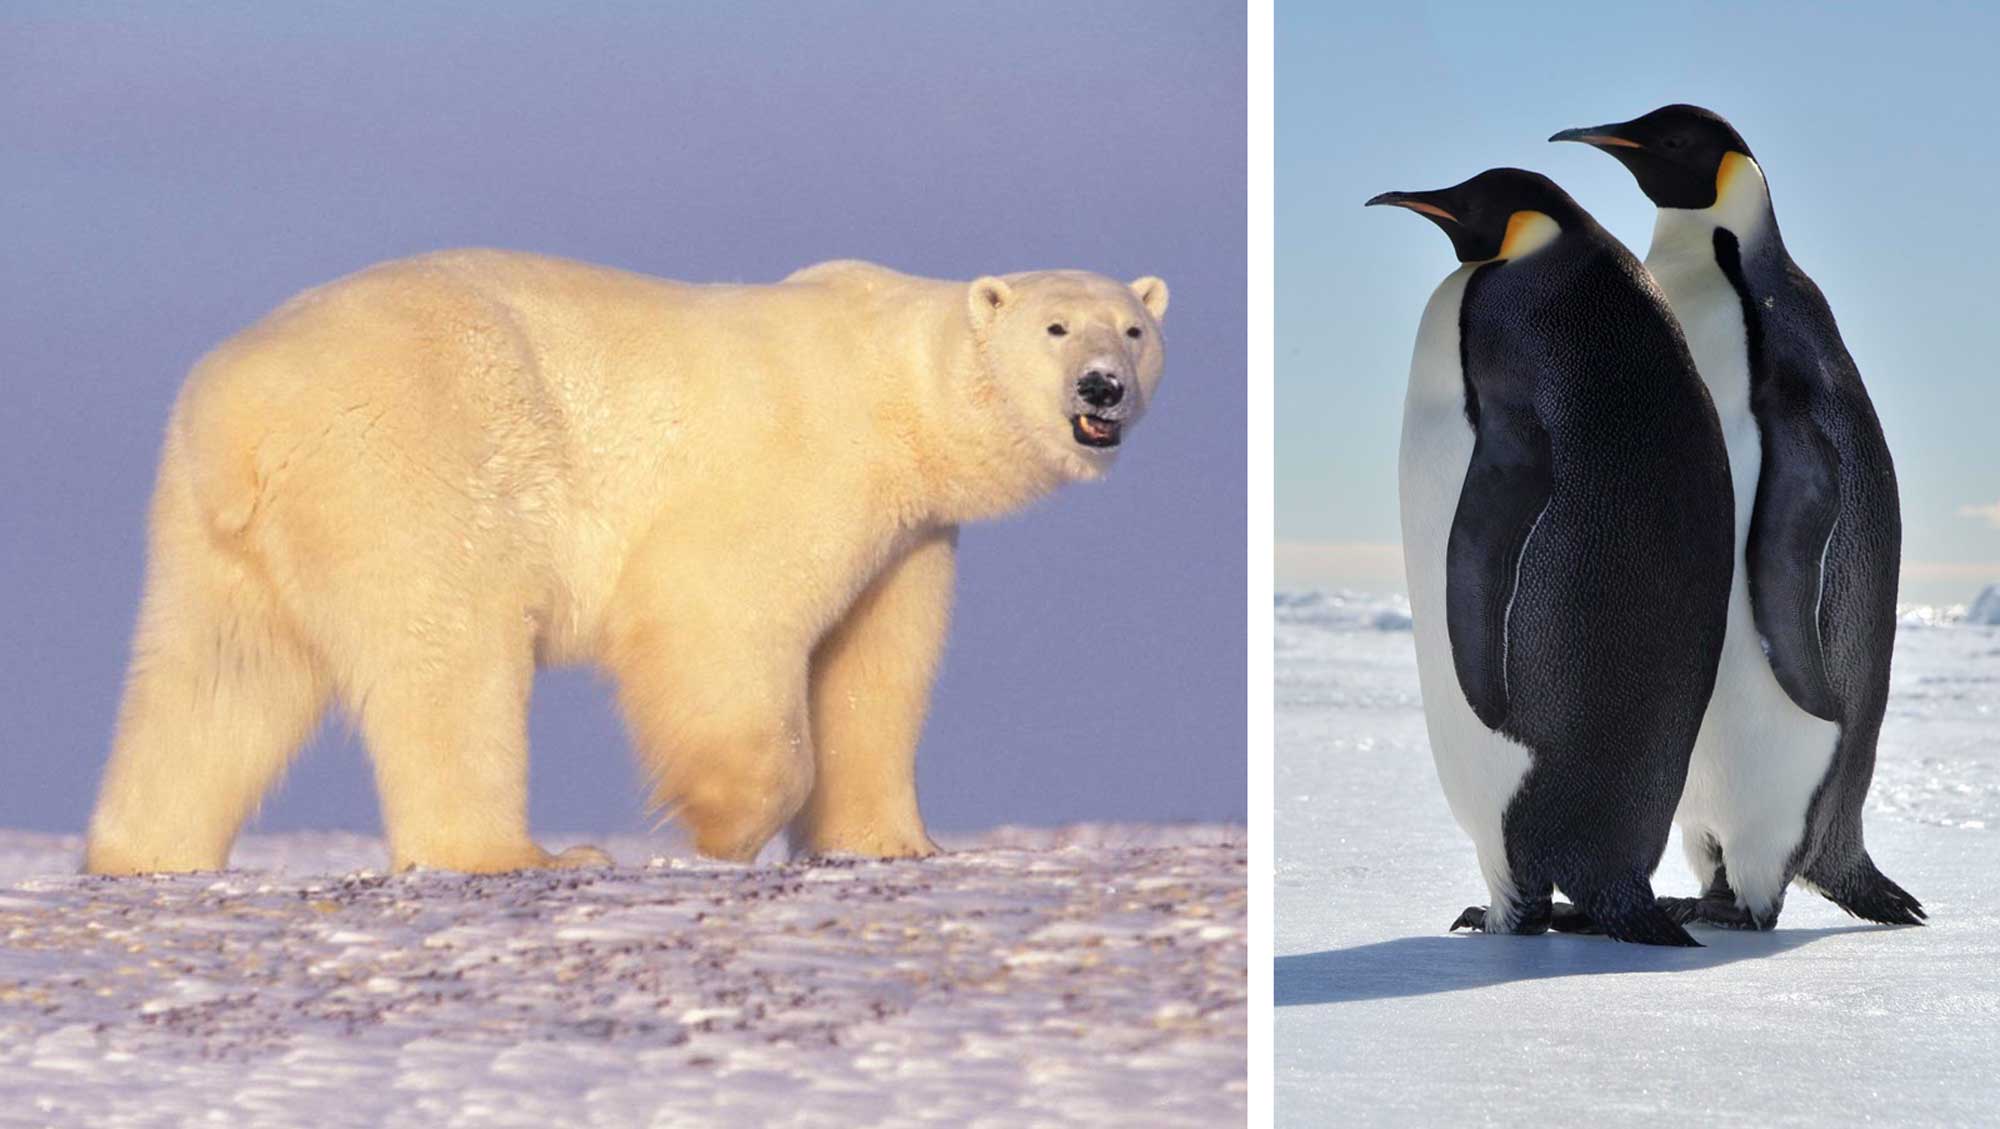 Two-part image showing a polar bear on the let and two penguins on the right.